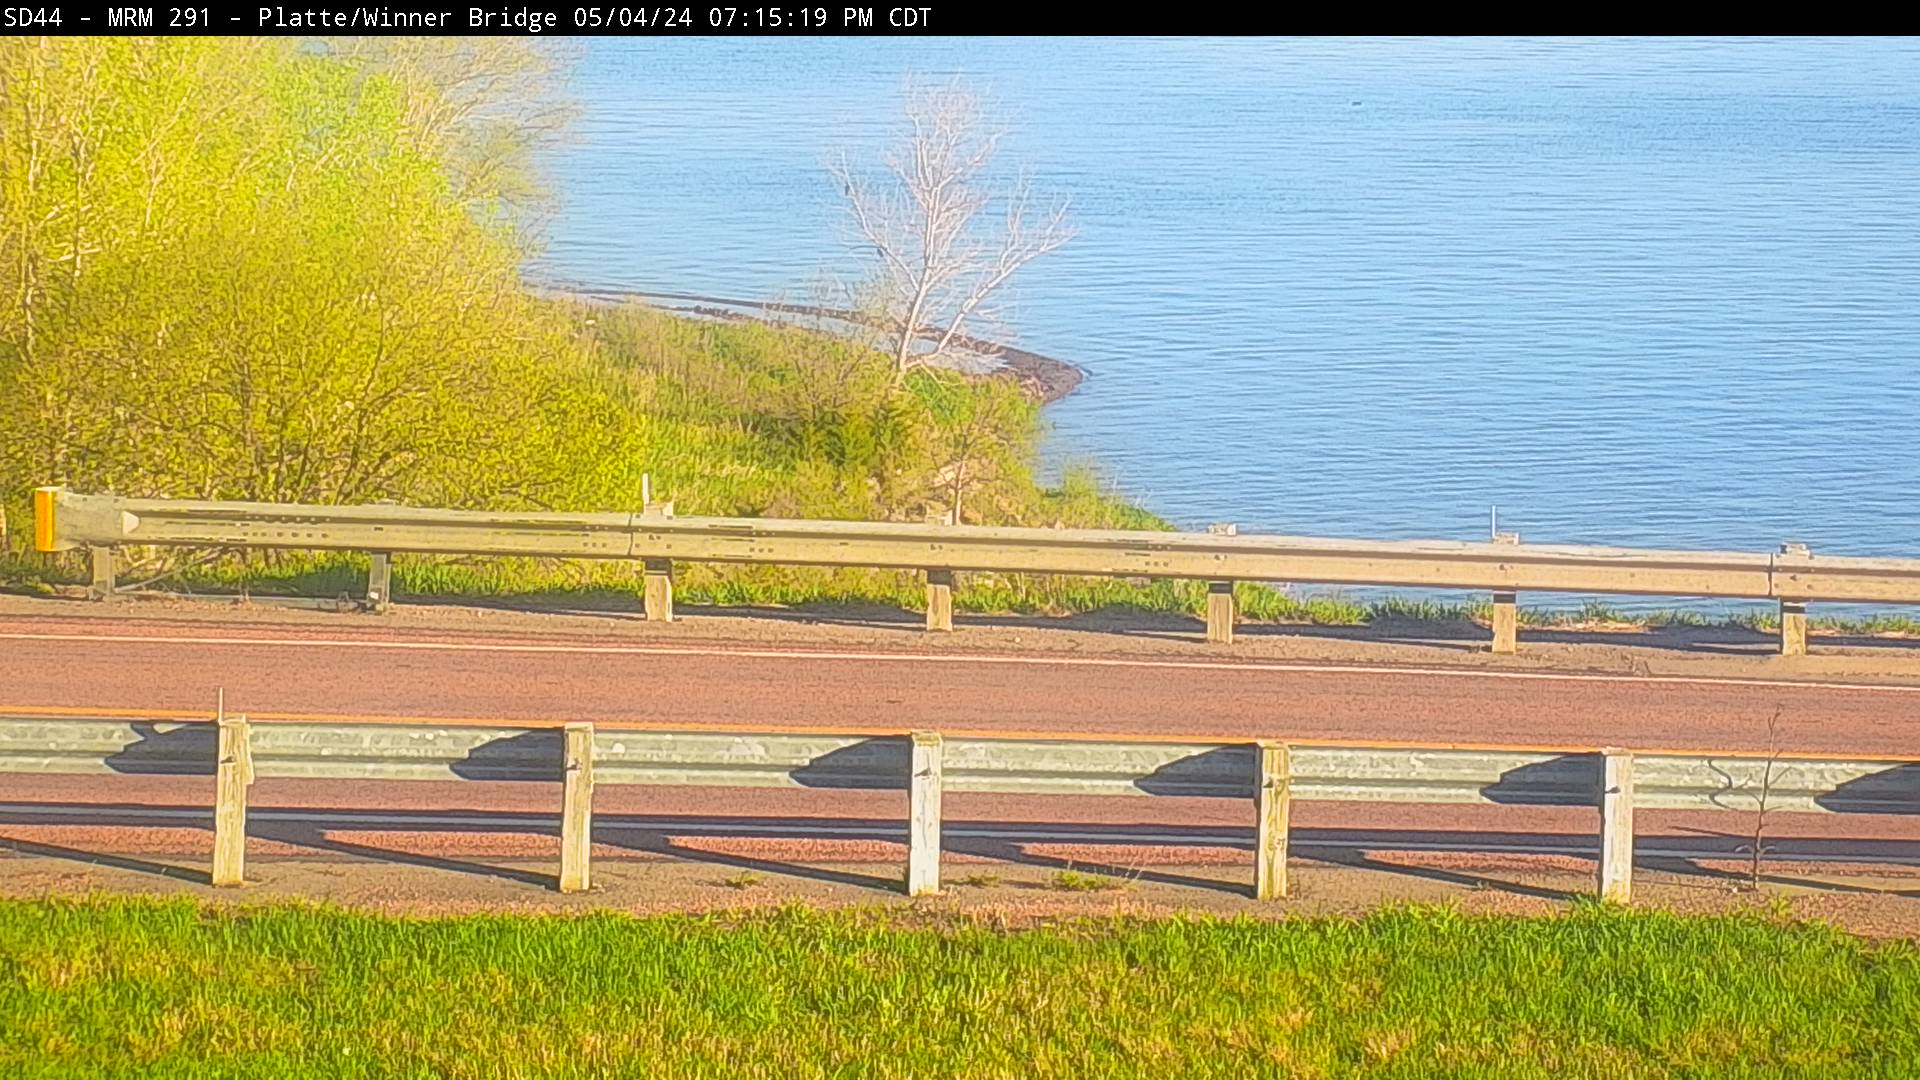 Traffic Cam West of town along SD-44 @ MP 291.6 - South Player